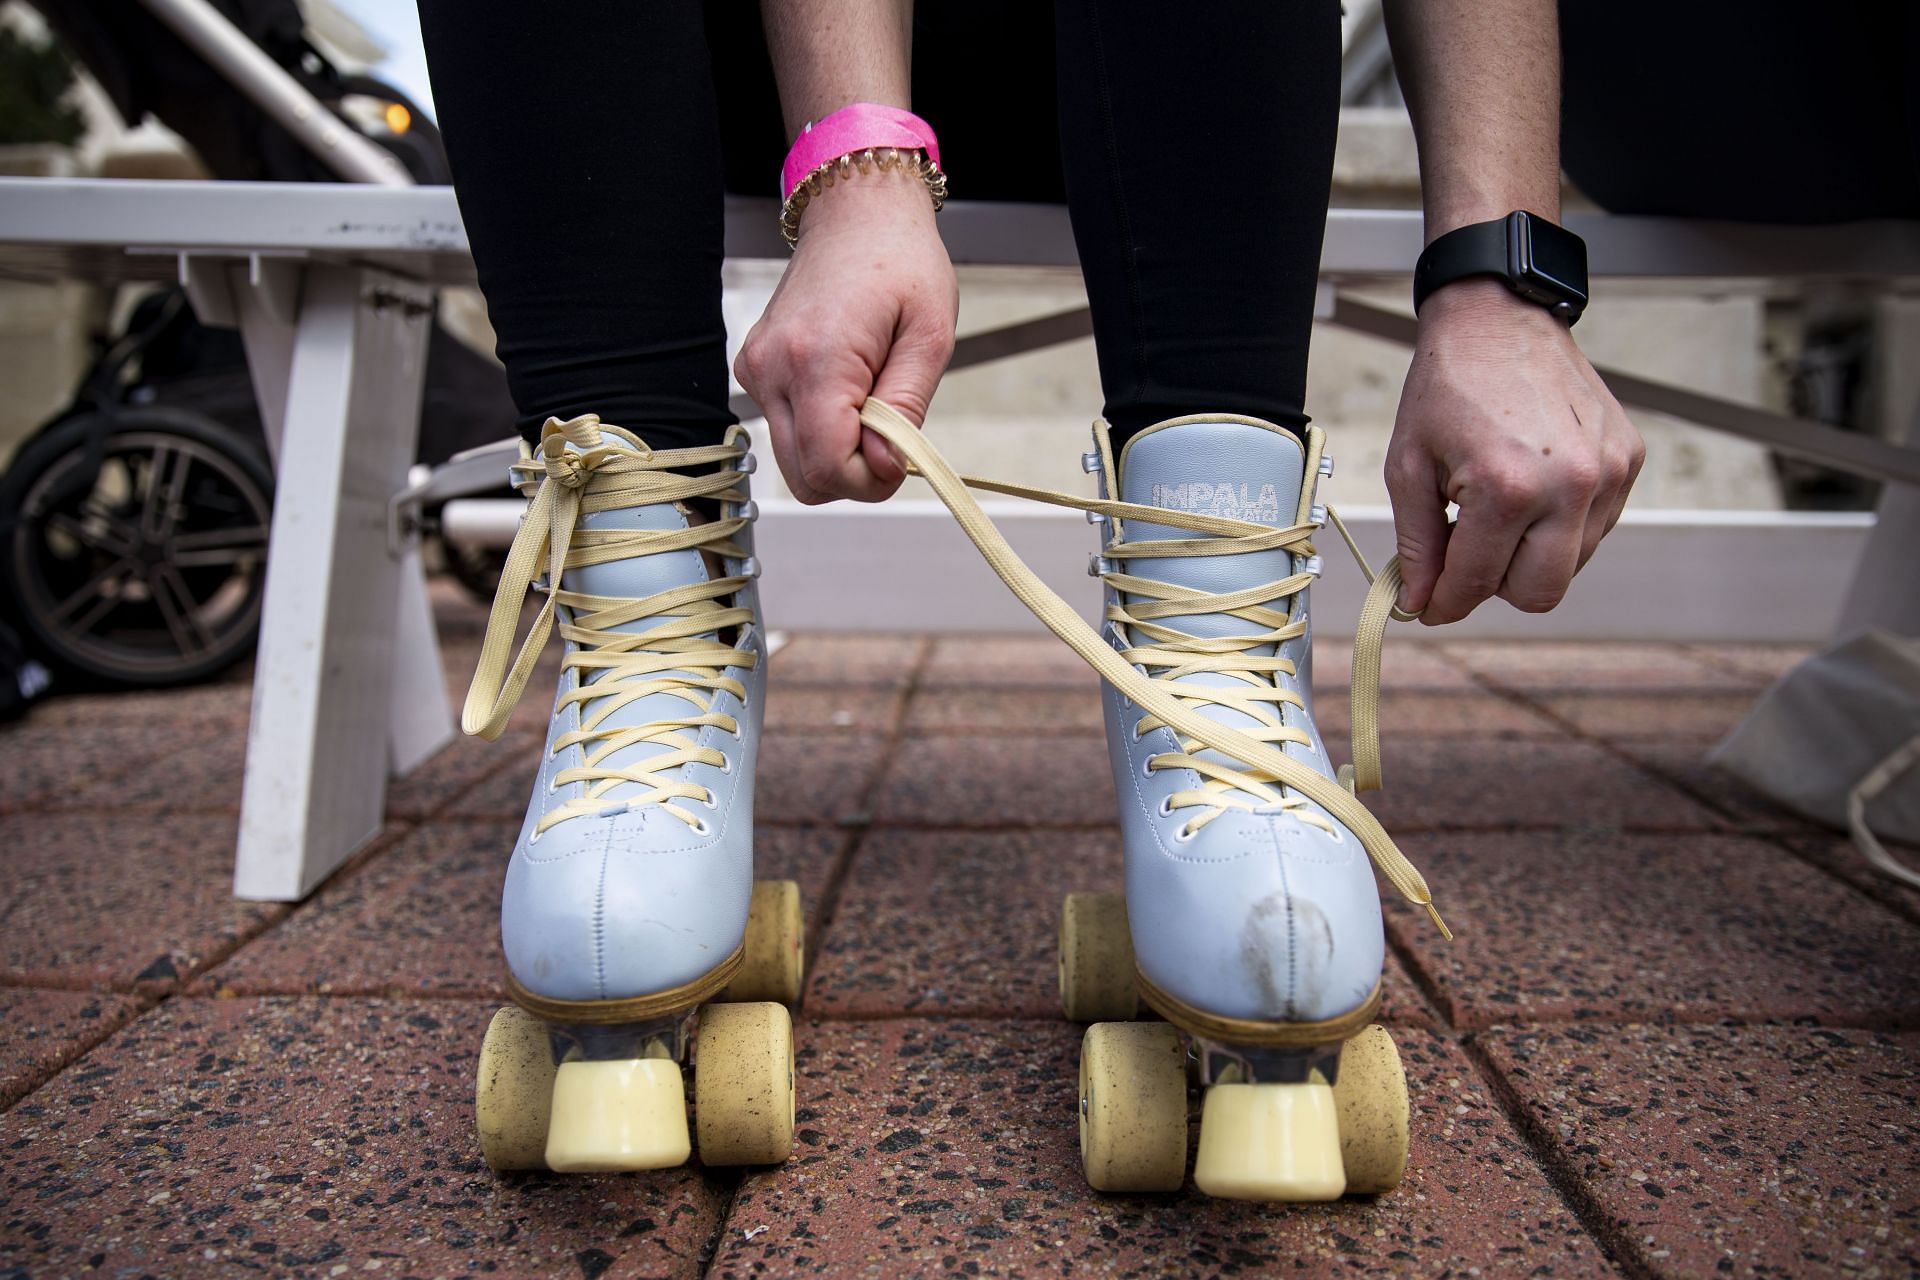 Rollerskating Event Brings Out Skaters In D.C.